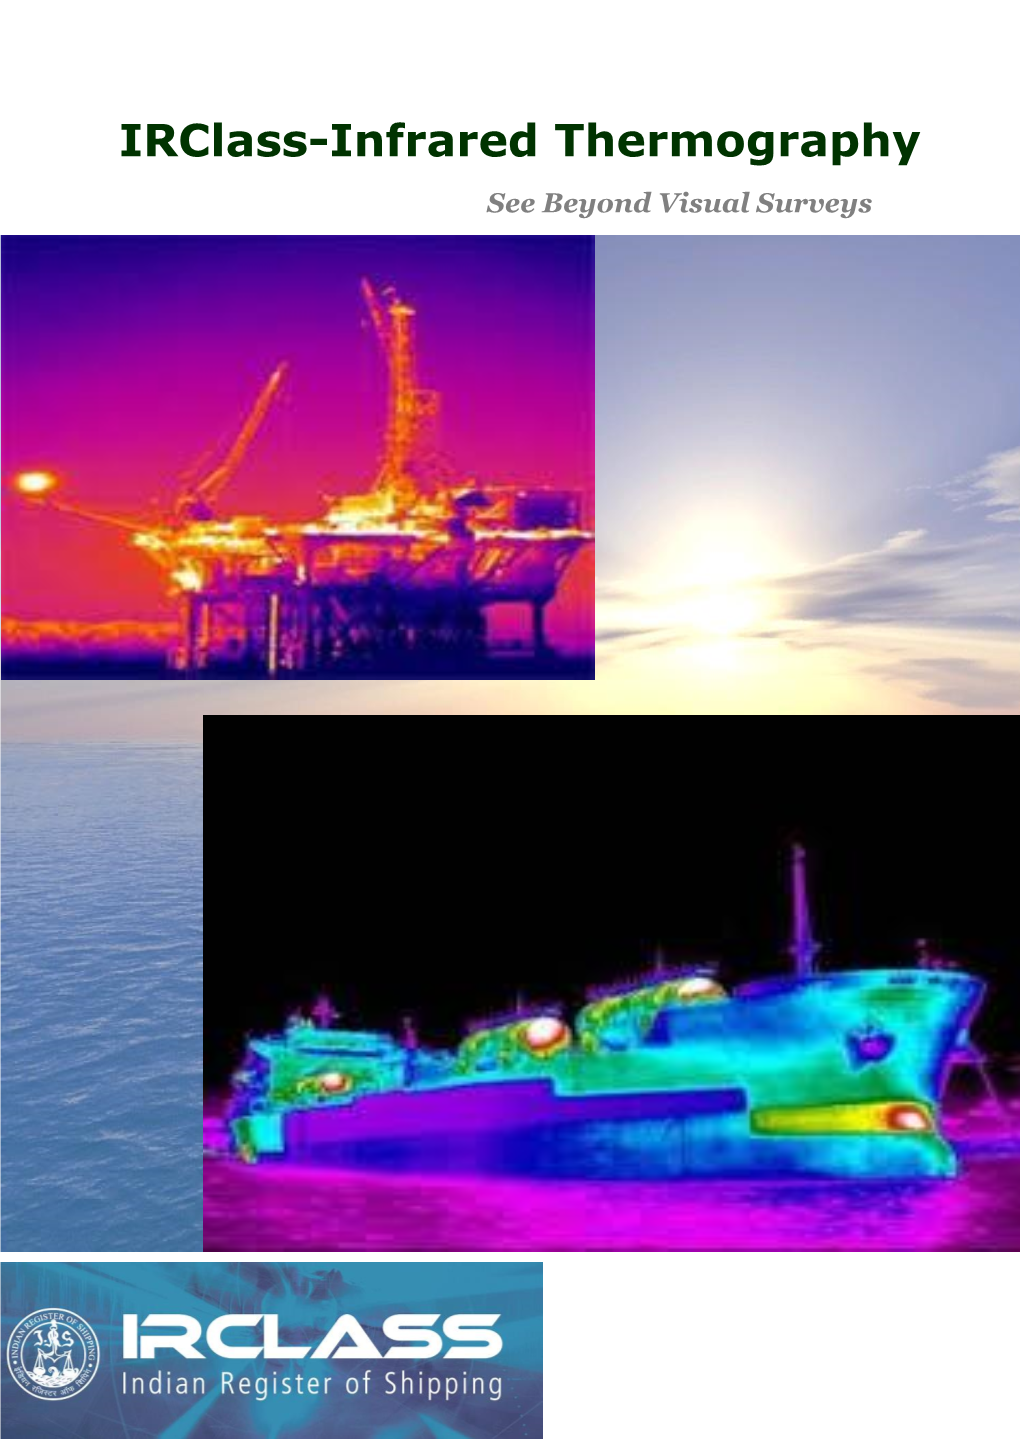 Thermography Analysis Program to Meet These Requirements